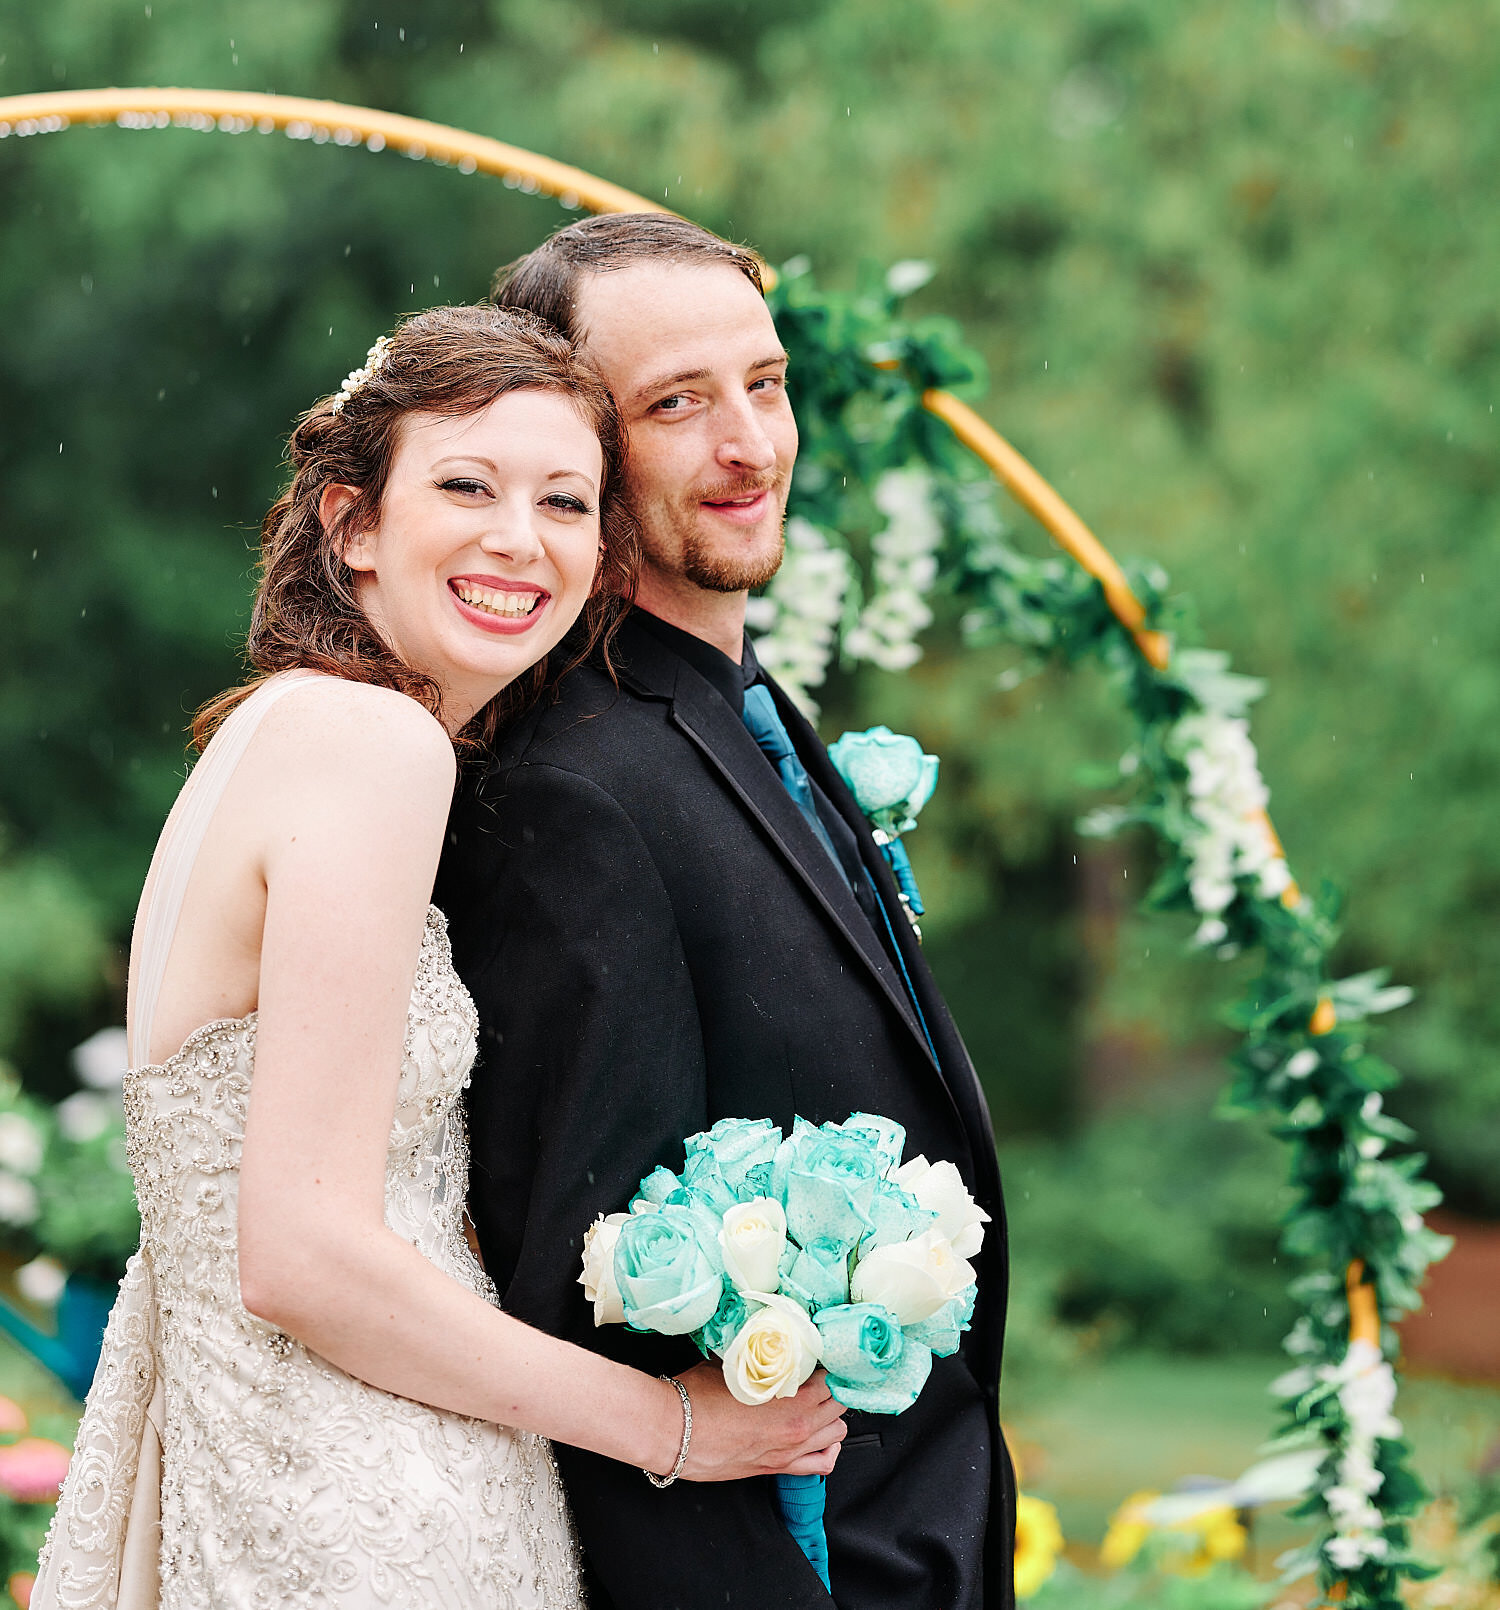  Alyssa Busching and George Goettel are getting married in their grandparents’ backyard under the pouring rain in the minds of the COVID-19 pandemic with only closest friends and family at the ceremony 